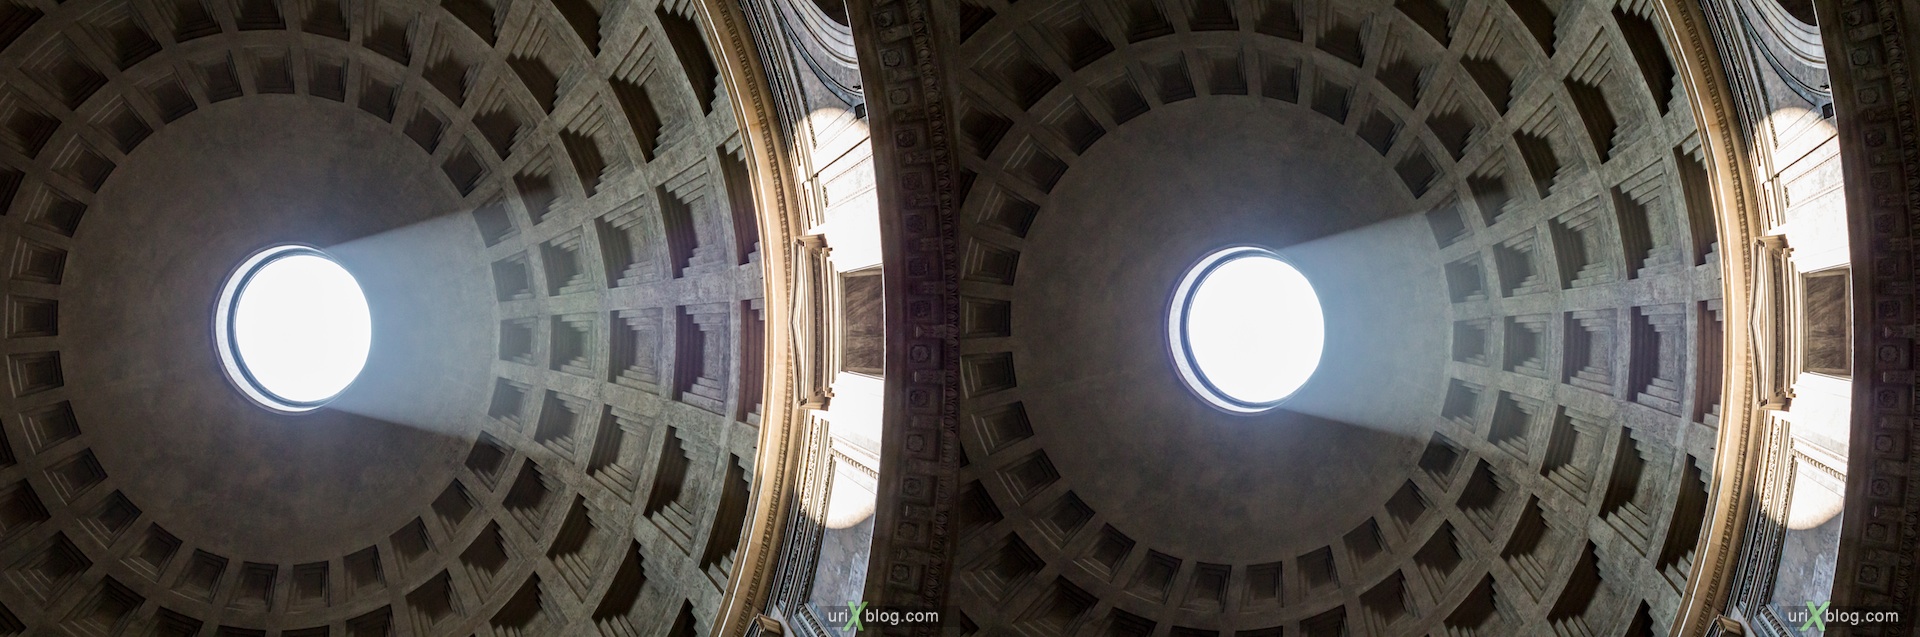 2012, Pantheon, Rome, Italy, 3D, stereo pair, cross-eyed, crossview, cross view stereo pair